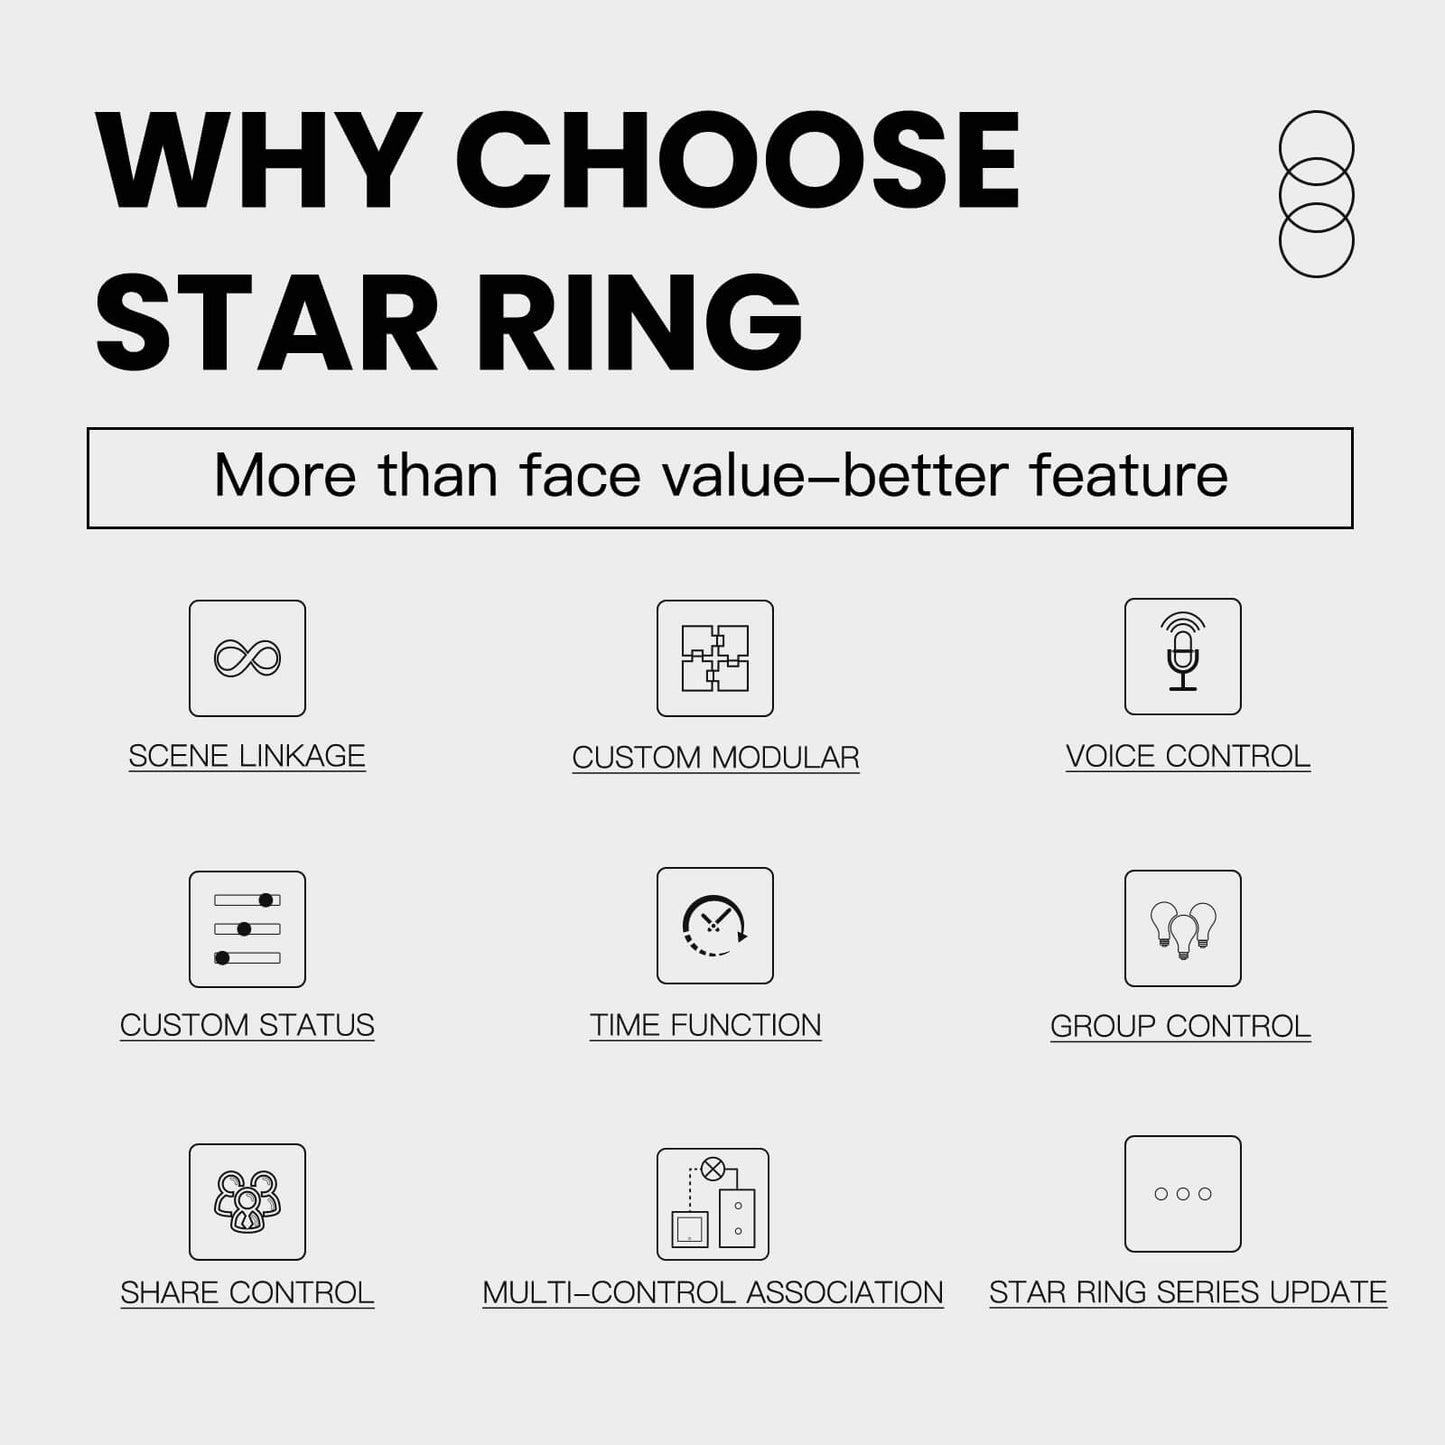 WHY CHOOSE STAR RING - MOES